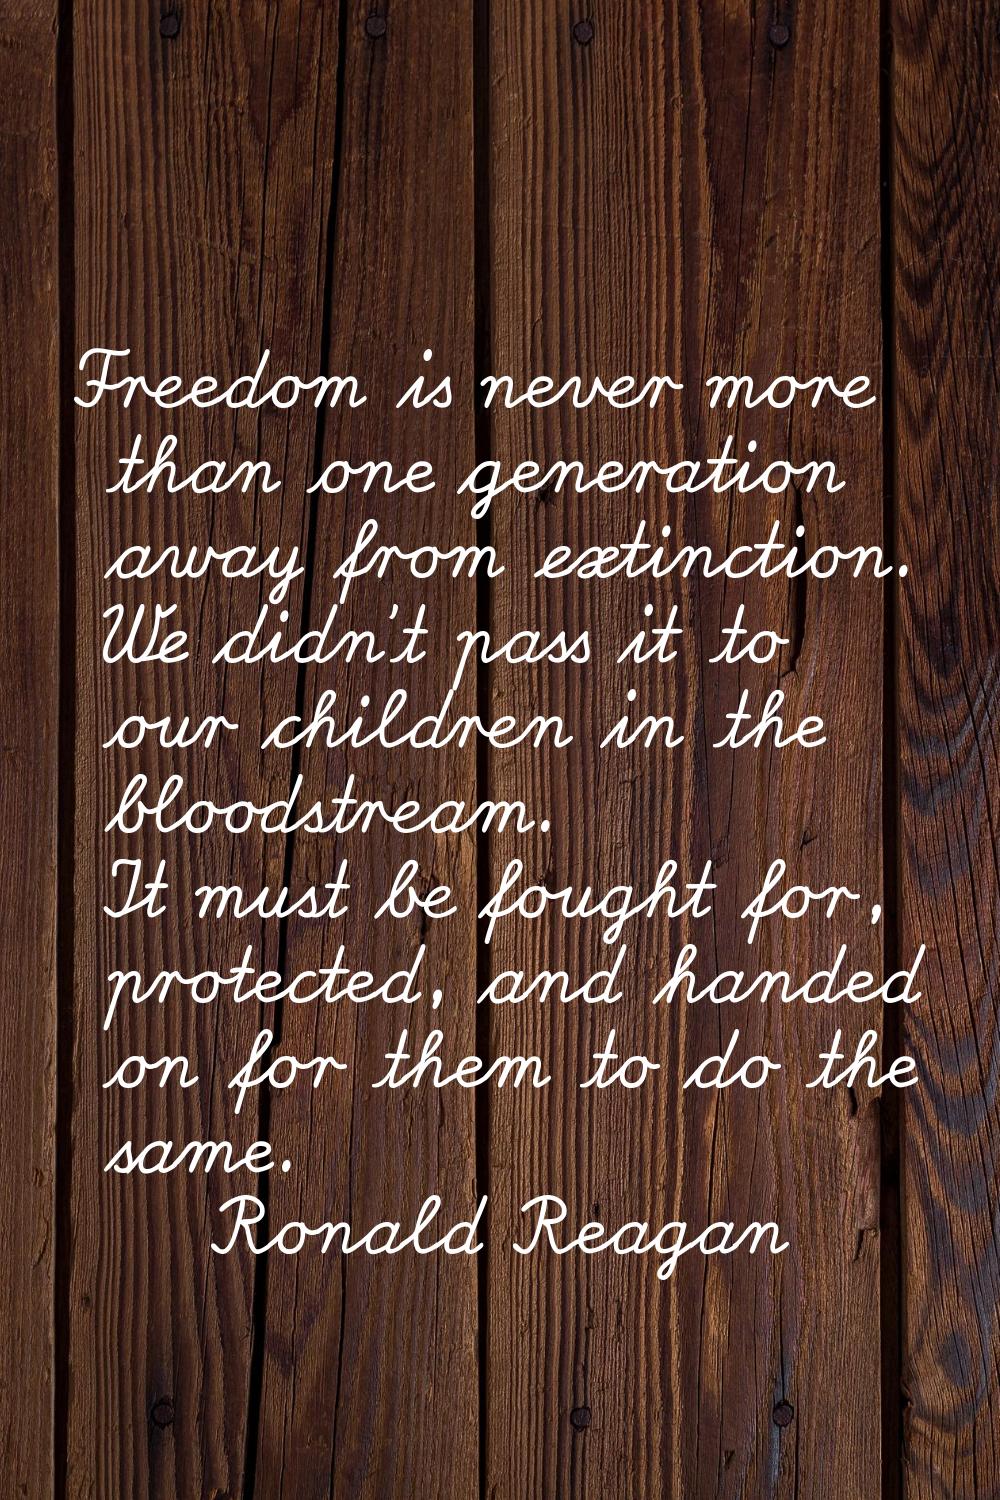 Freedom is never more than one generation away from extinction. We didn't pass it to our children i